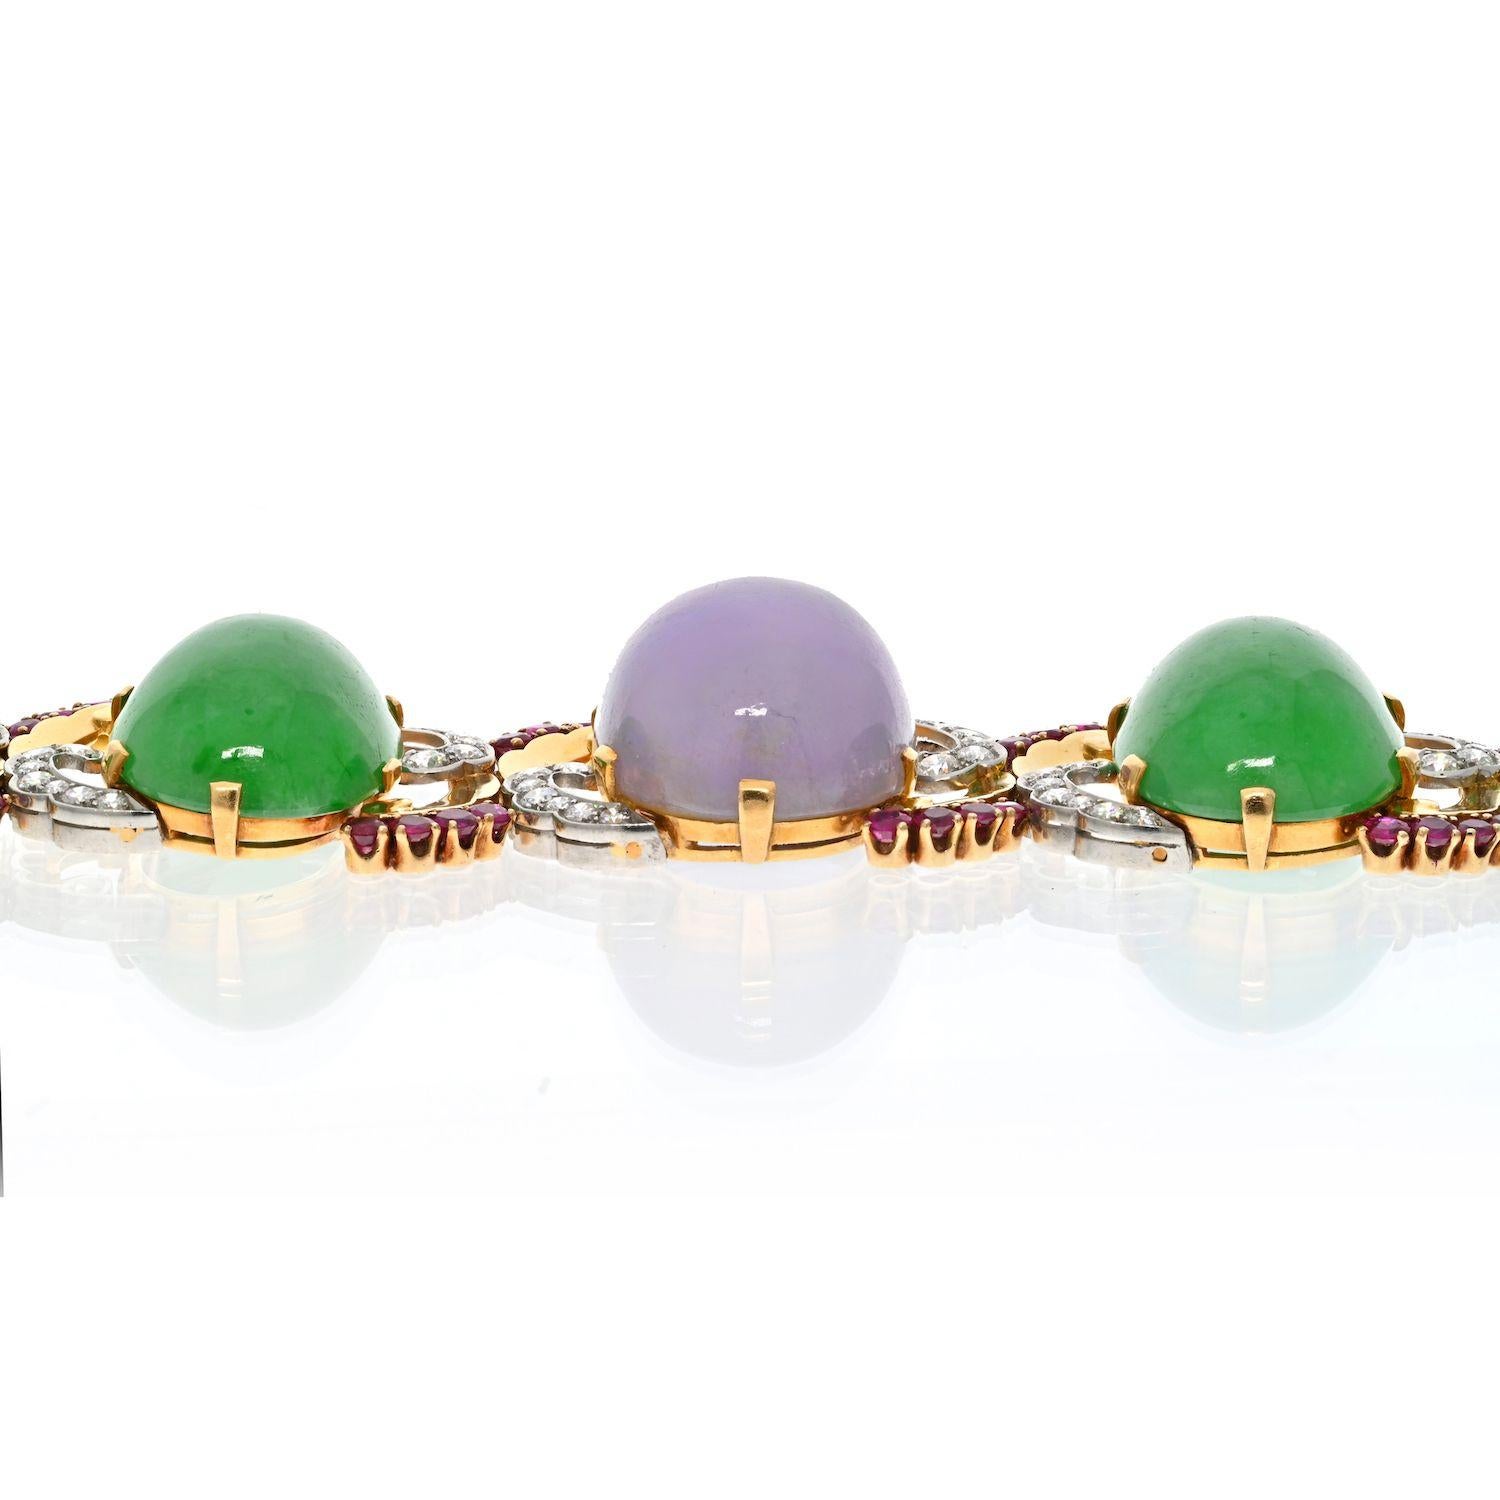 This is a breautiful 1940's yellow gold and platinum bracelet mounted with cabochon oval cut Jade, diamonds and rubies. We are absolutely in love with this vintage gem! The incredible rich colors, fine detailing and Old World charm make this